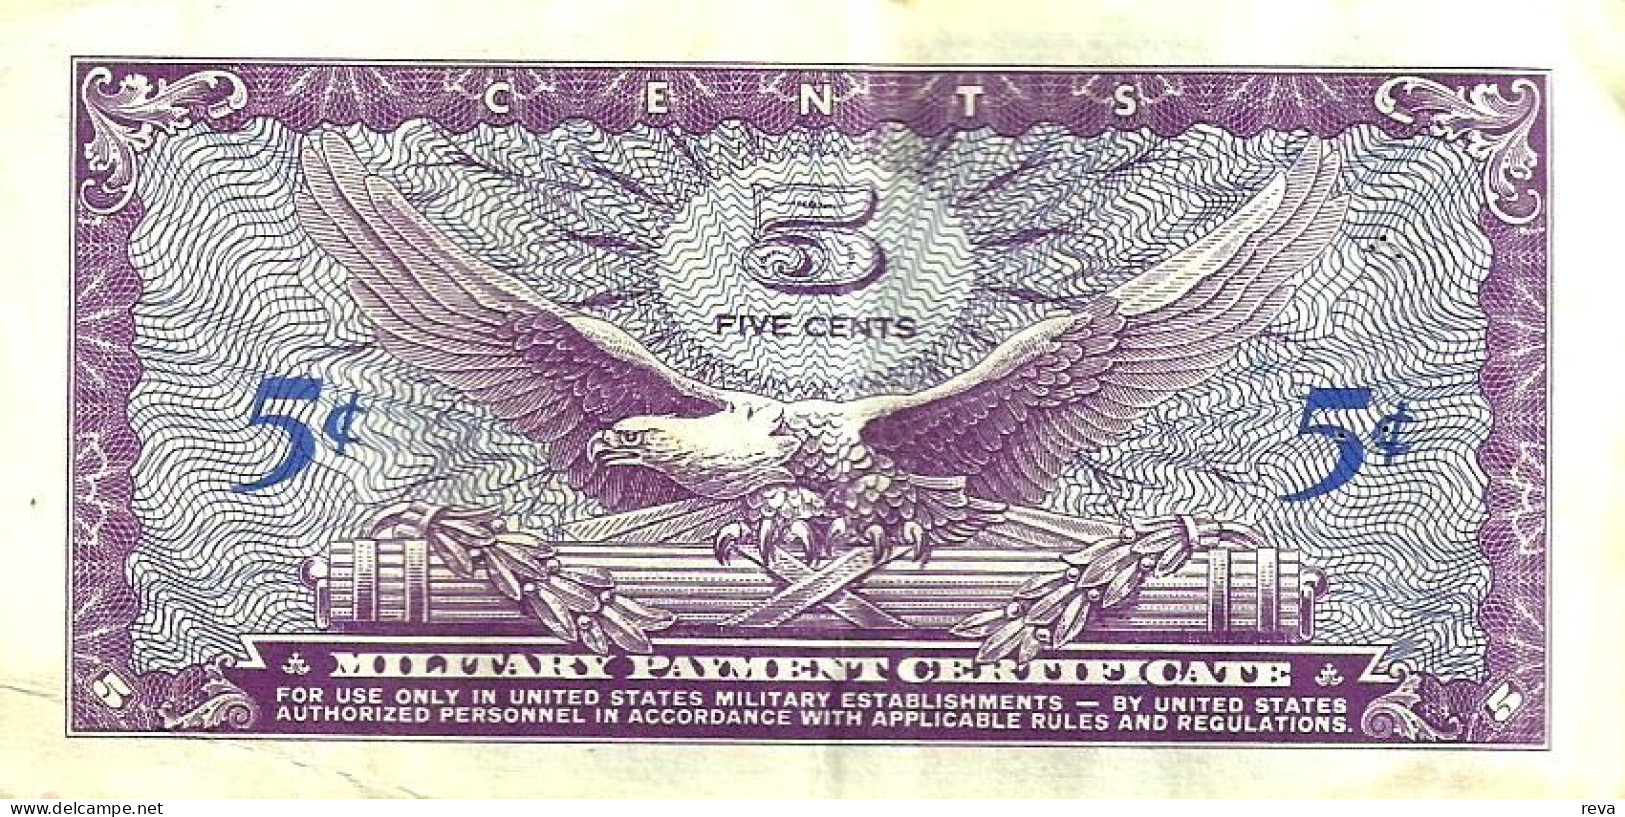 USA UNITED STATES 5 CENTS MILITARY CERTIFICATE PURPLE WOMAN SERIES 641 VF ND(1965-68) PM57a READ DESCRIPTION CAREFULLY!! - 1965-1968 - Series 641